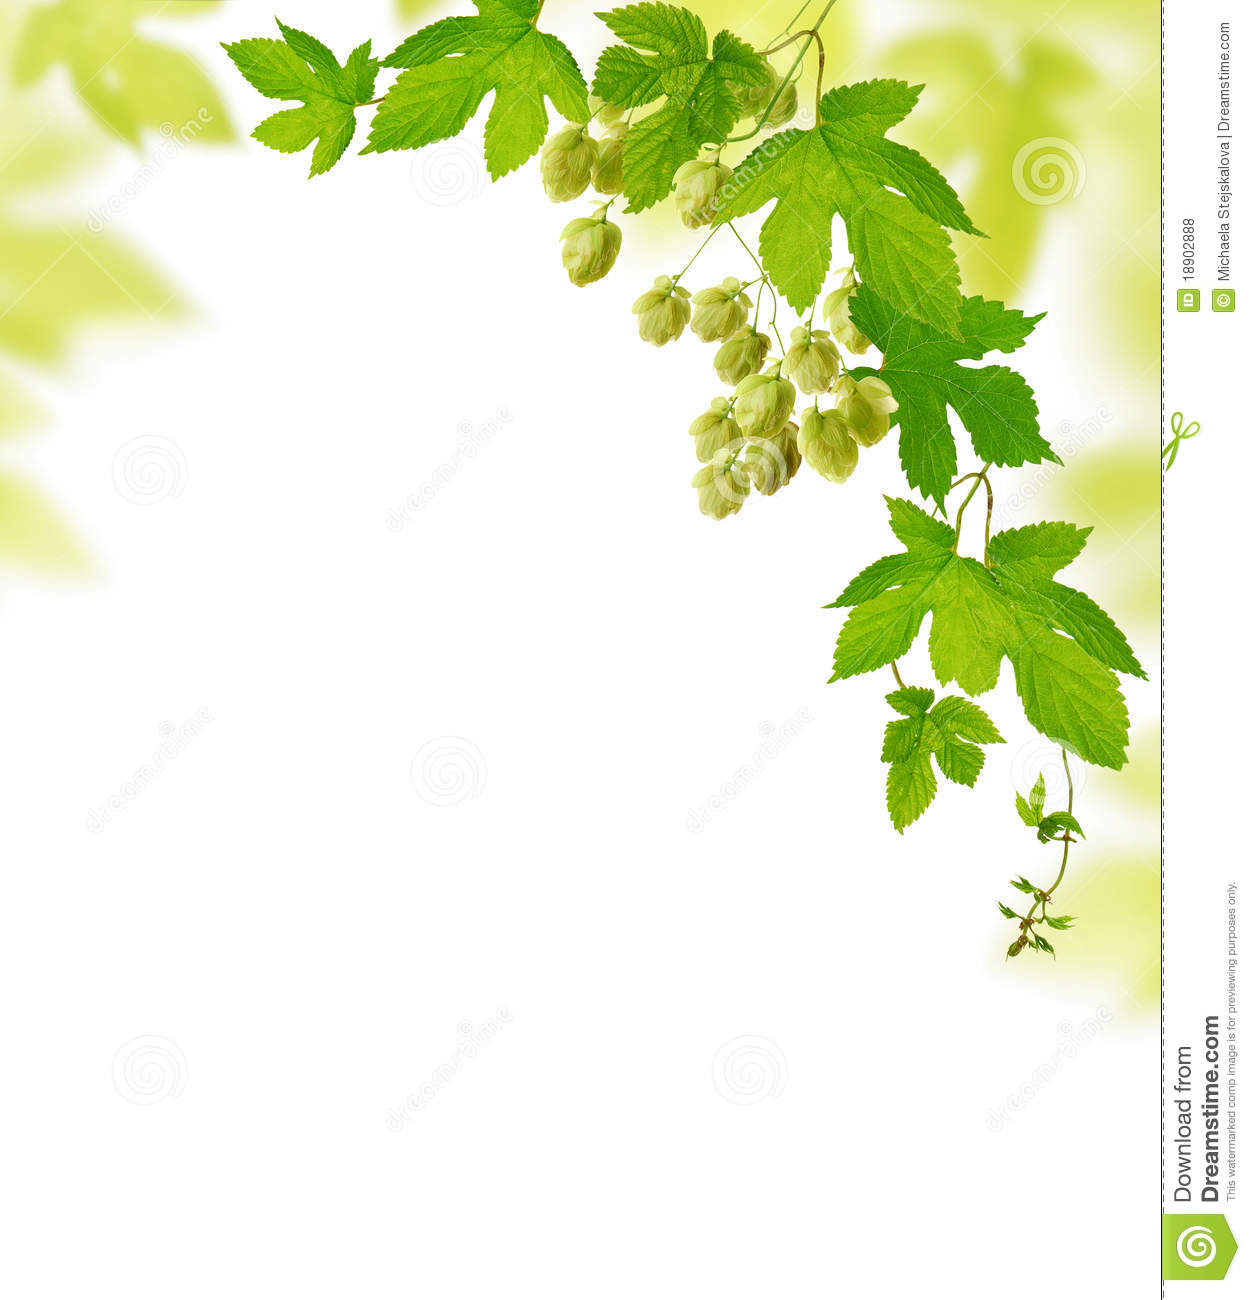 Decorative Frame With Fresh Hop Branches Isolated On White Background